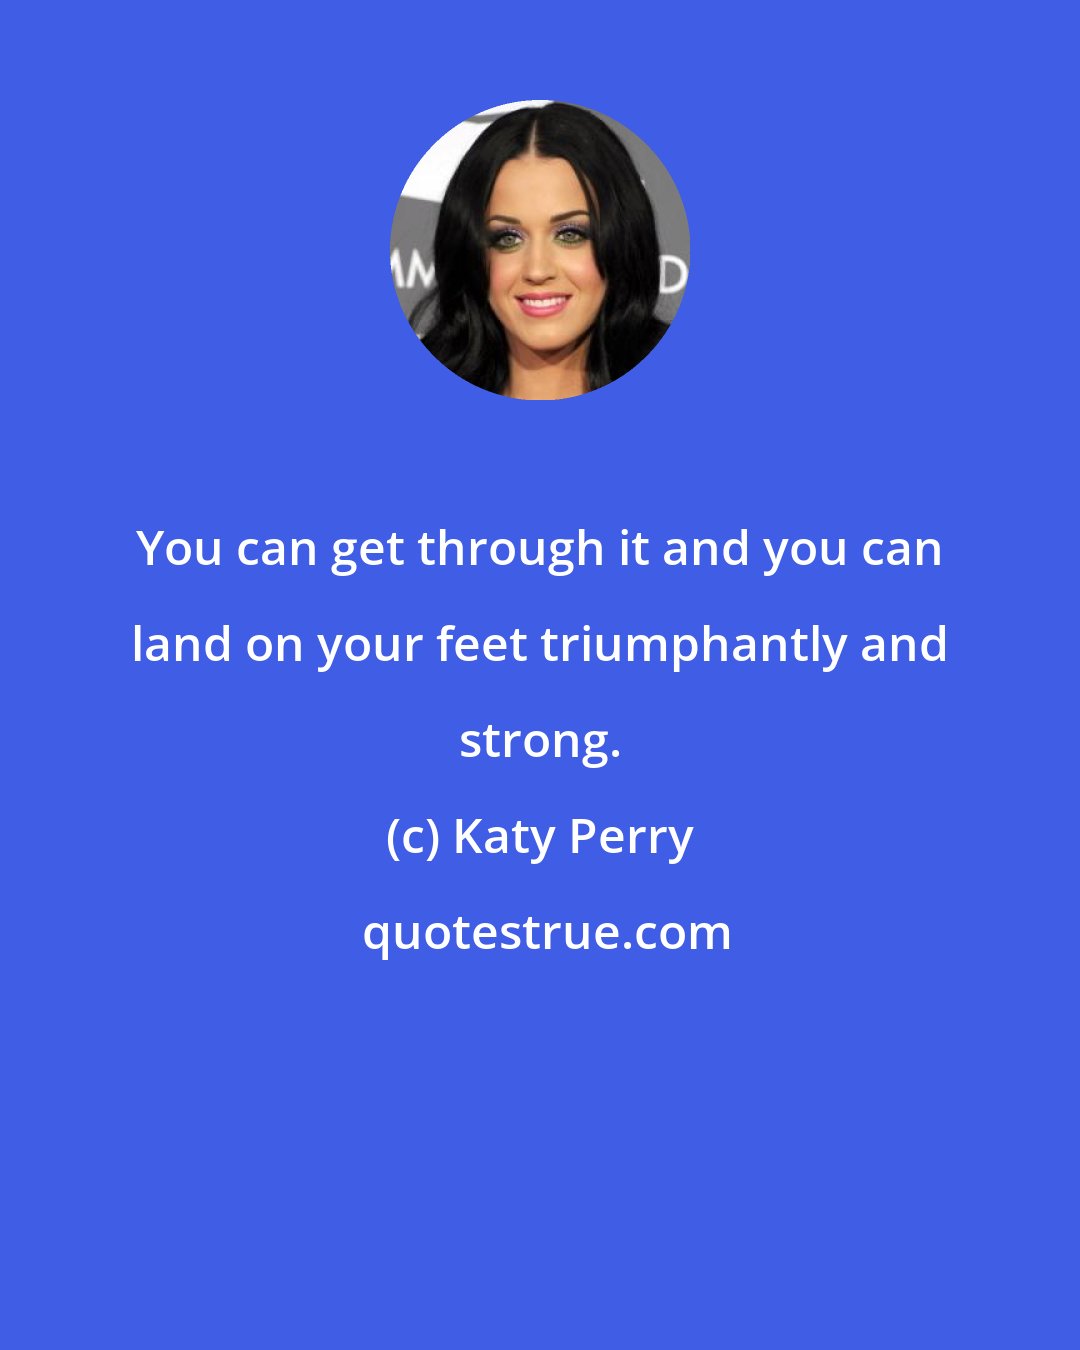 Katy Perry: You can get through it and you can land on your feet triumphantly and strong.